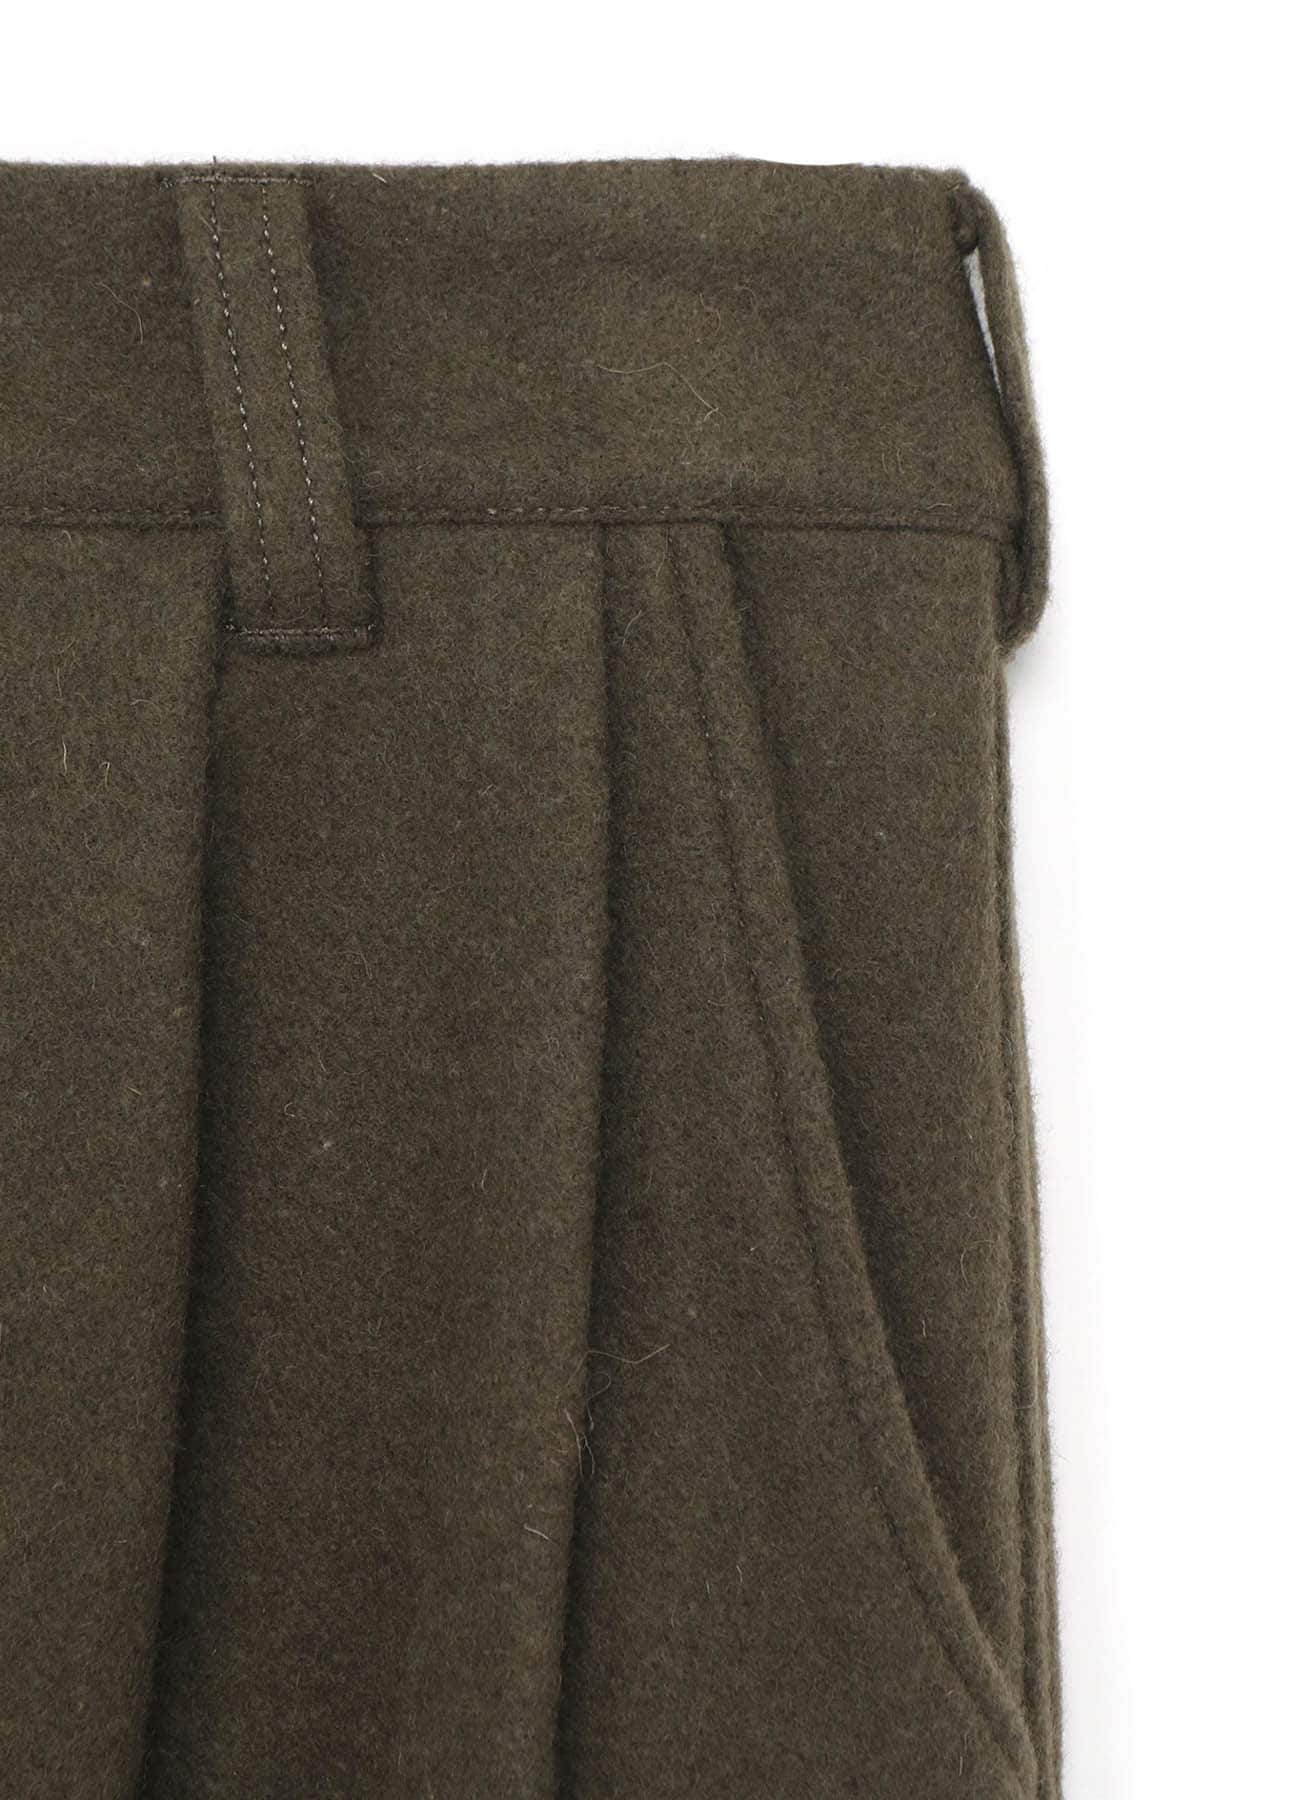 RECYCLED WOOL MELTON 2 TUCK WIDE CUFFED PANTS